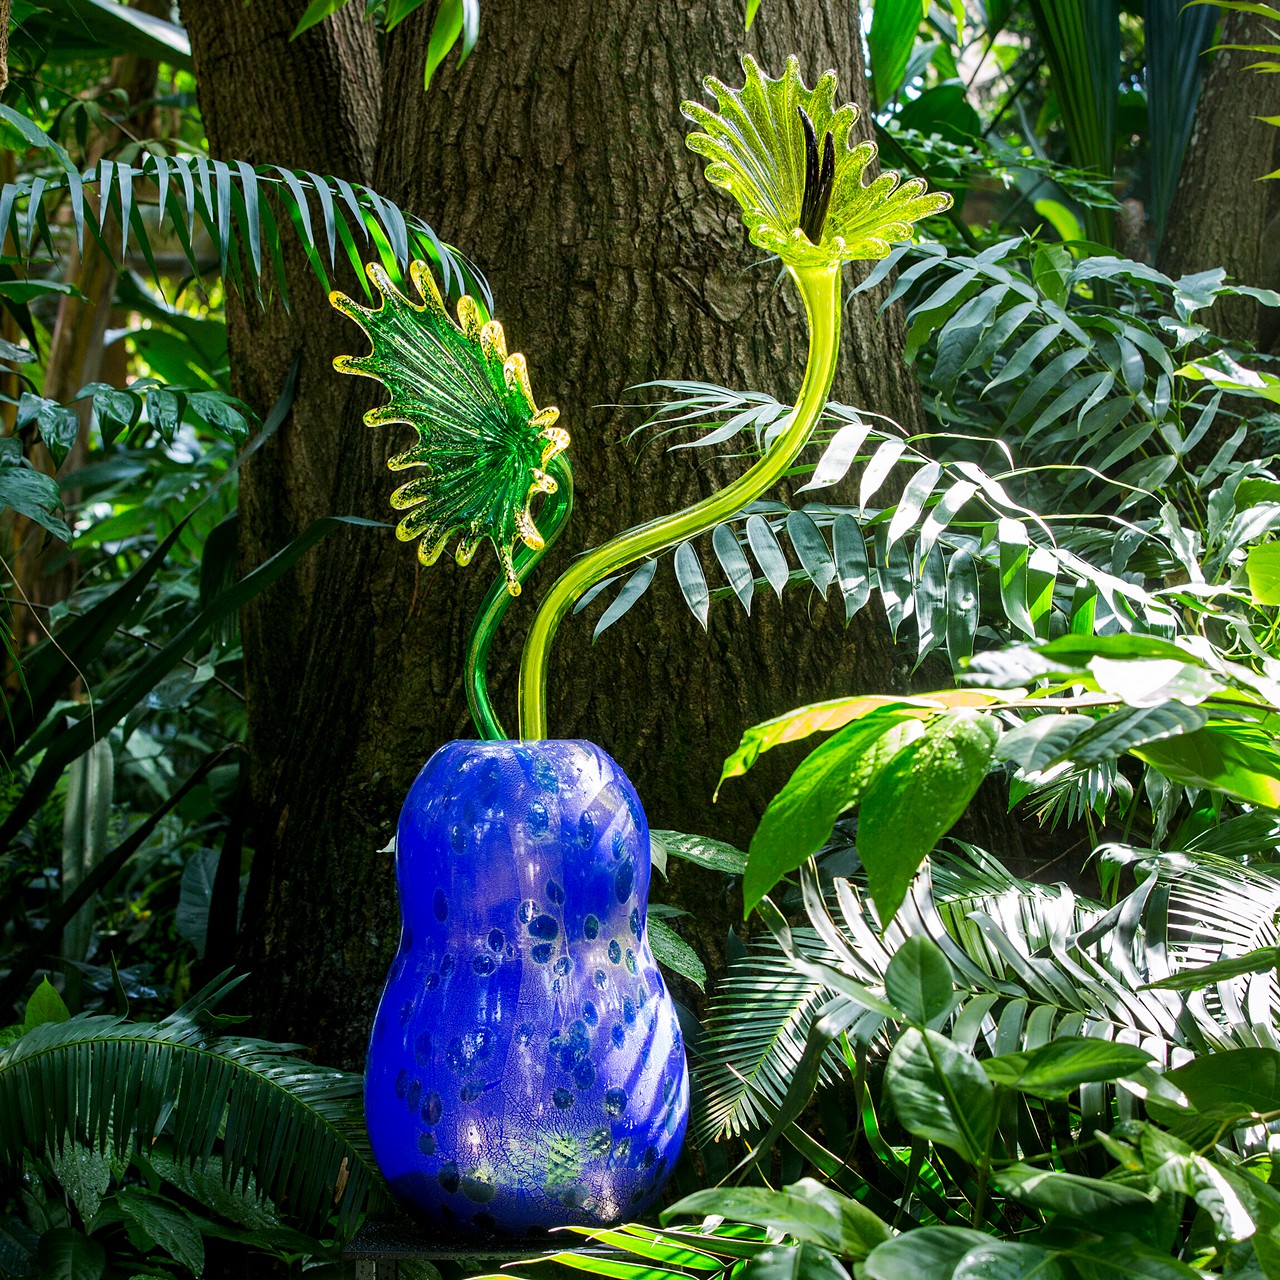 Dale Chihuly
Imperial Blue Ikebana with Green Frog Foot Stems, 2002
56 x 37 x 13"
Atlanta Botanical Garden, installed 2016
© 2022 Chihuly Studio. All rights reserved.